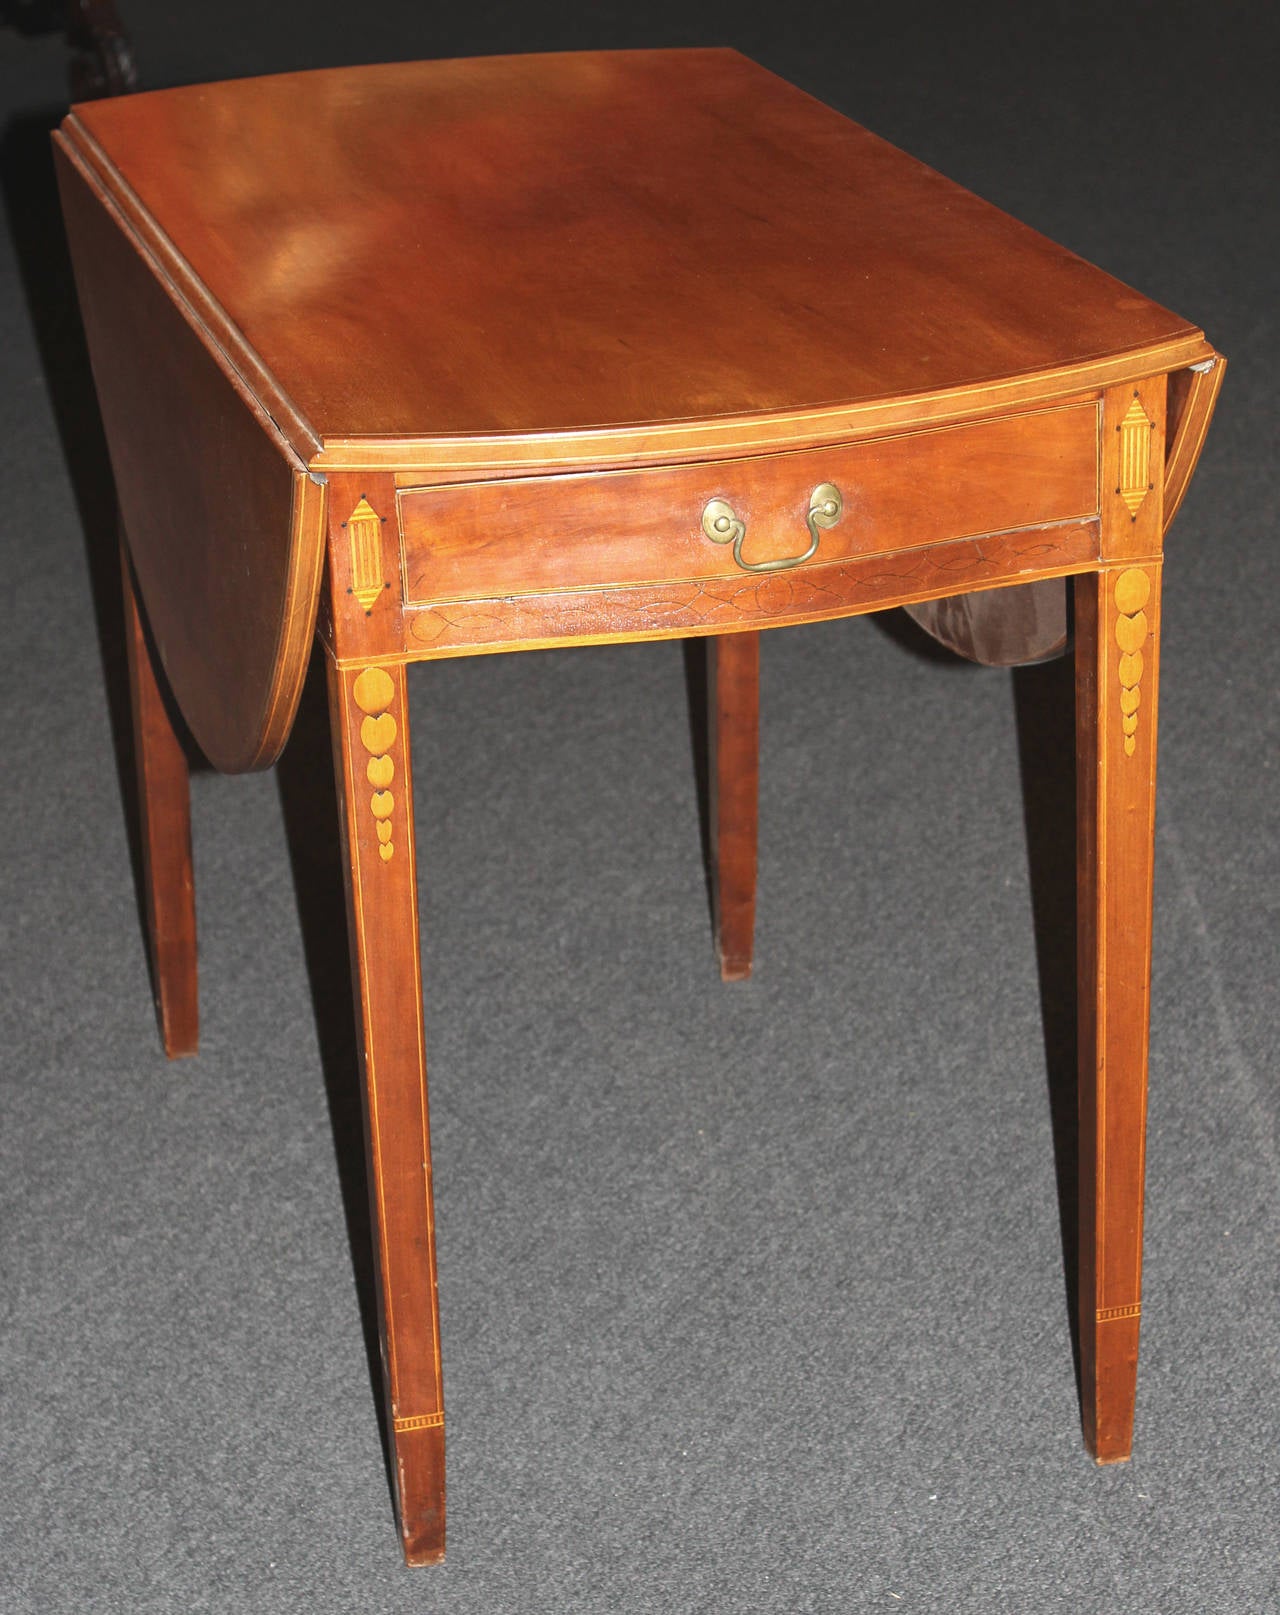 A fine Federal period, cherry Pembroke table with finely detailed inlay, dating to the early 19th century, attributed to Connecticut River Valley cabinet maker William Lloyd (1779-1845), of Springfield, Massachusetts, known for the skillful vine or